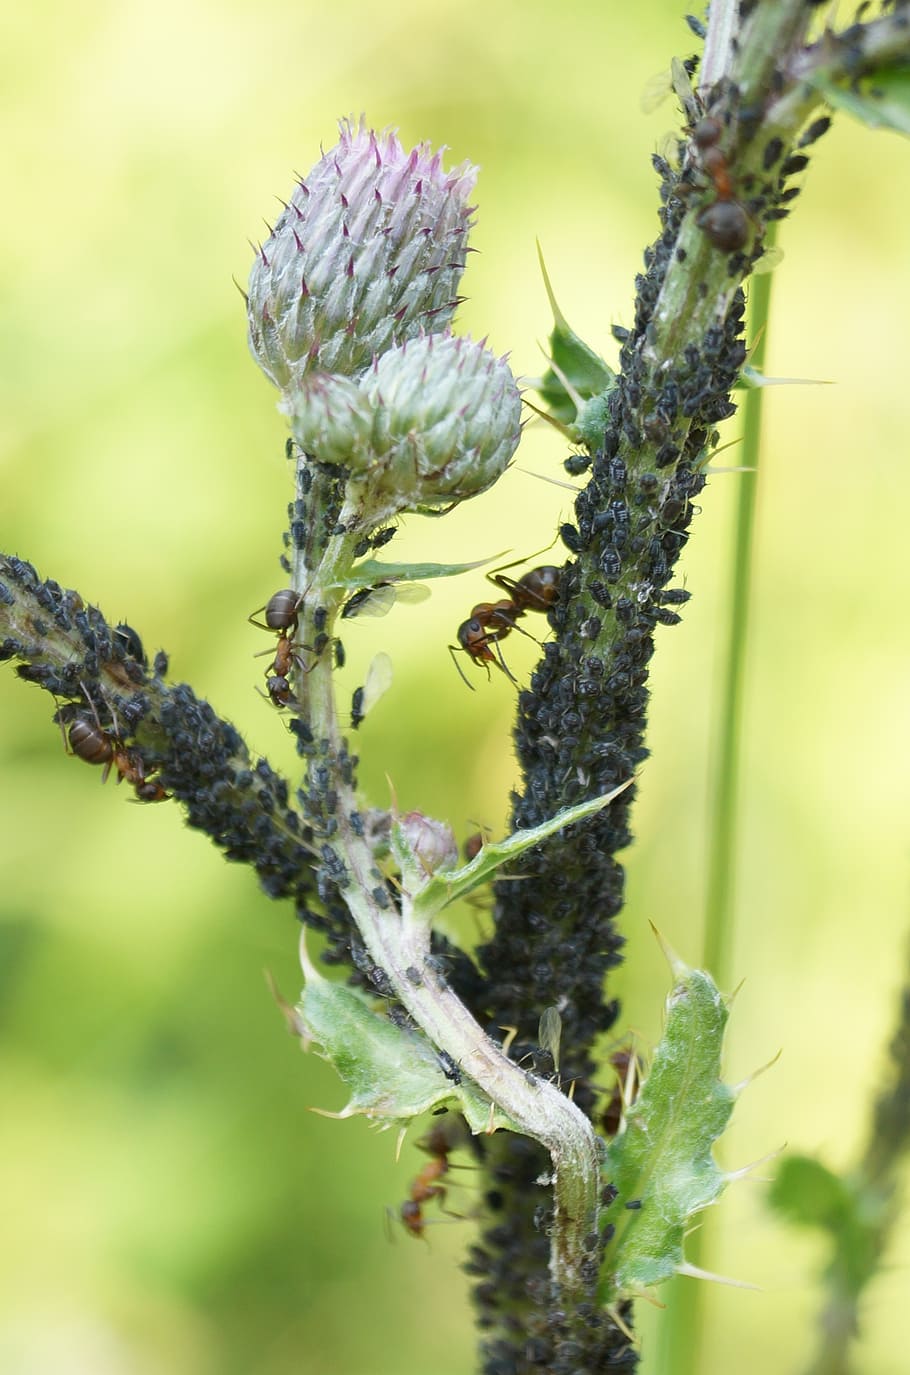 aphids, thistle, lice, infestation, ill, ants, forest, nature